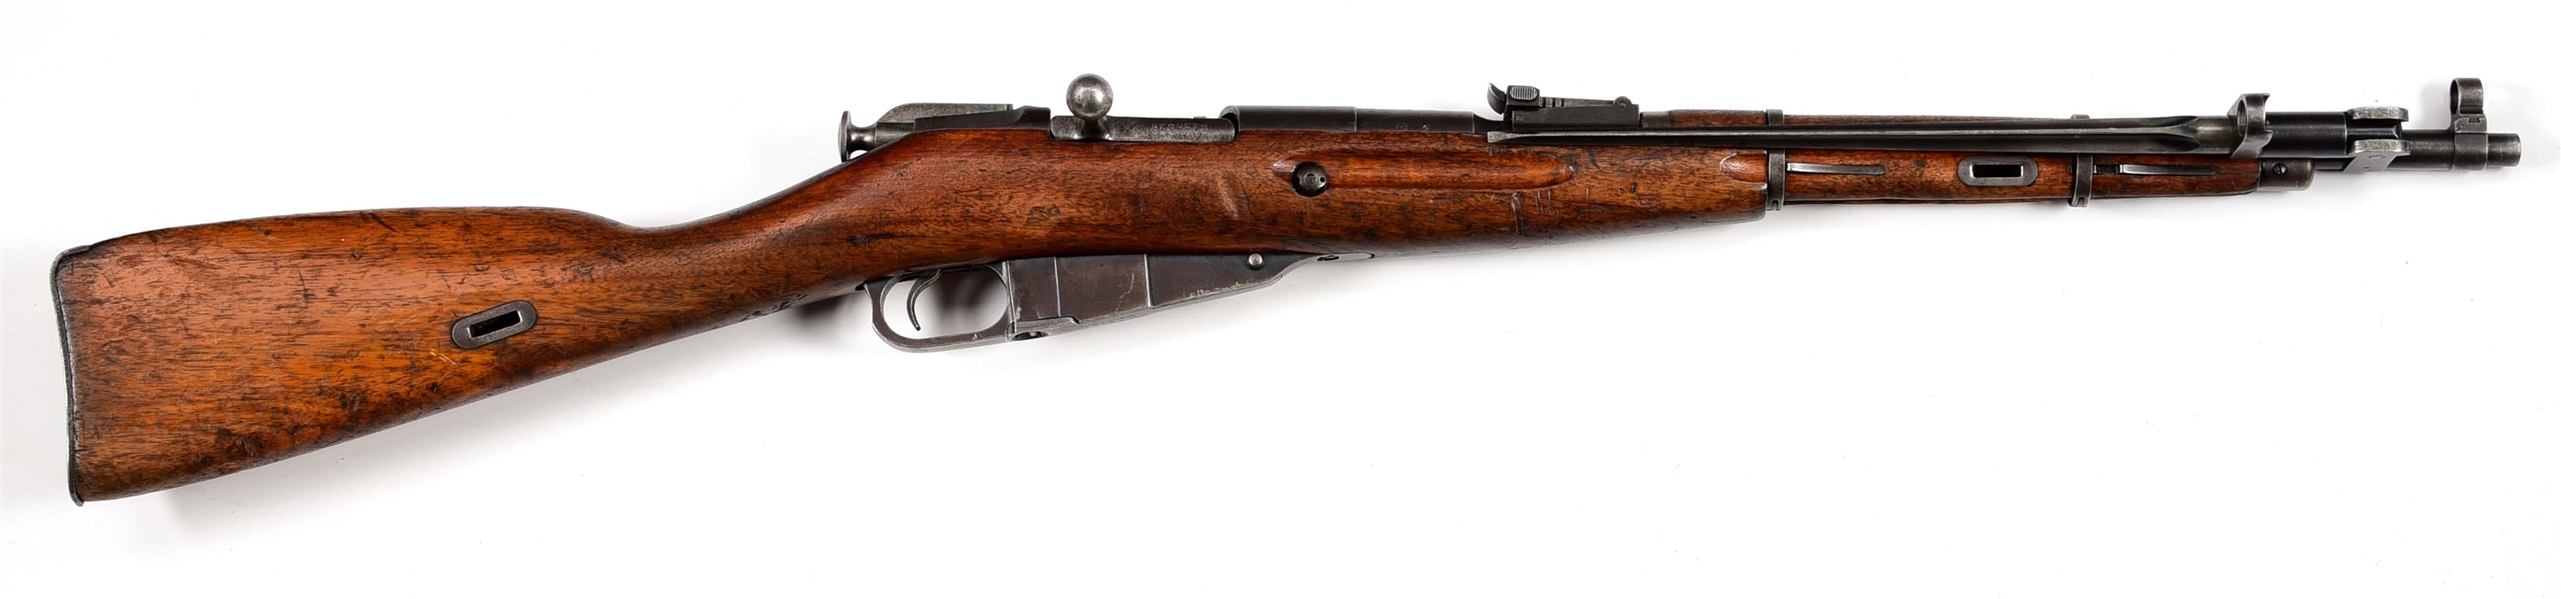 (C) CHINESE CONTRACT MOSIN NAGANT T53 BOLT ACTION CARBINE